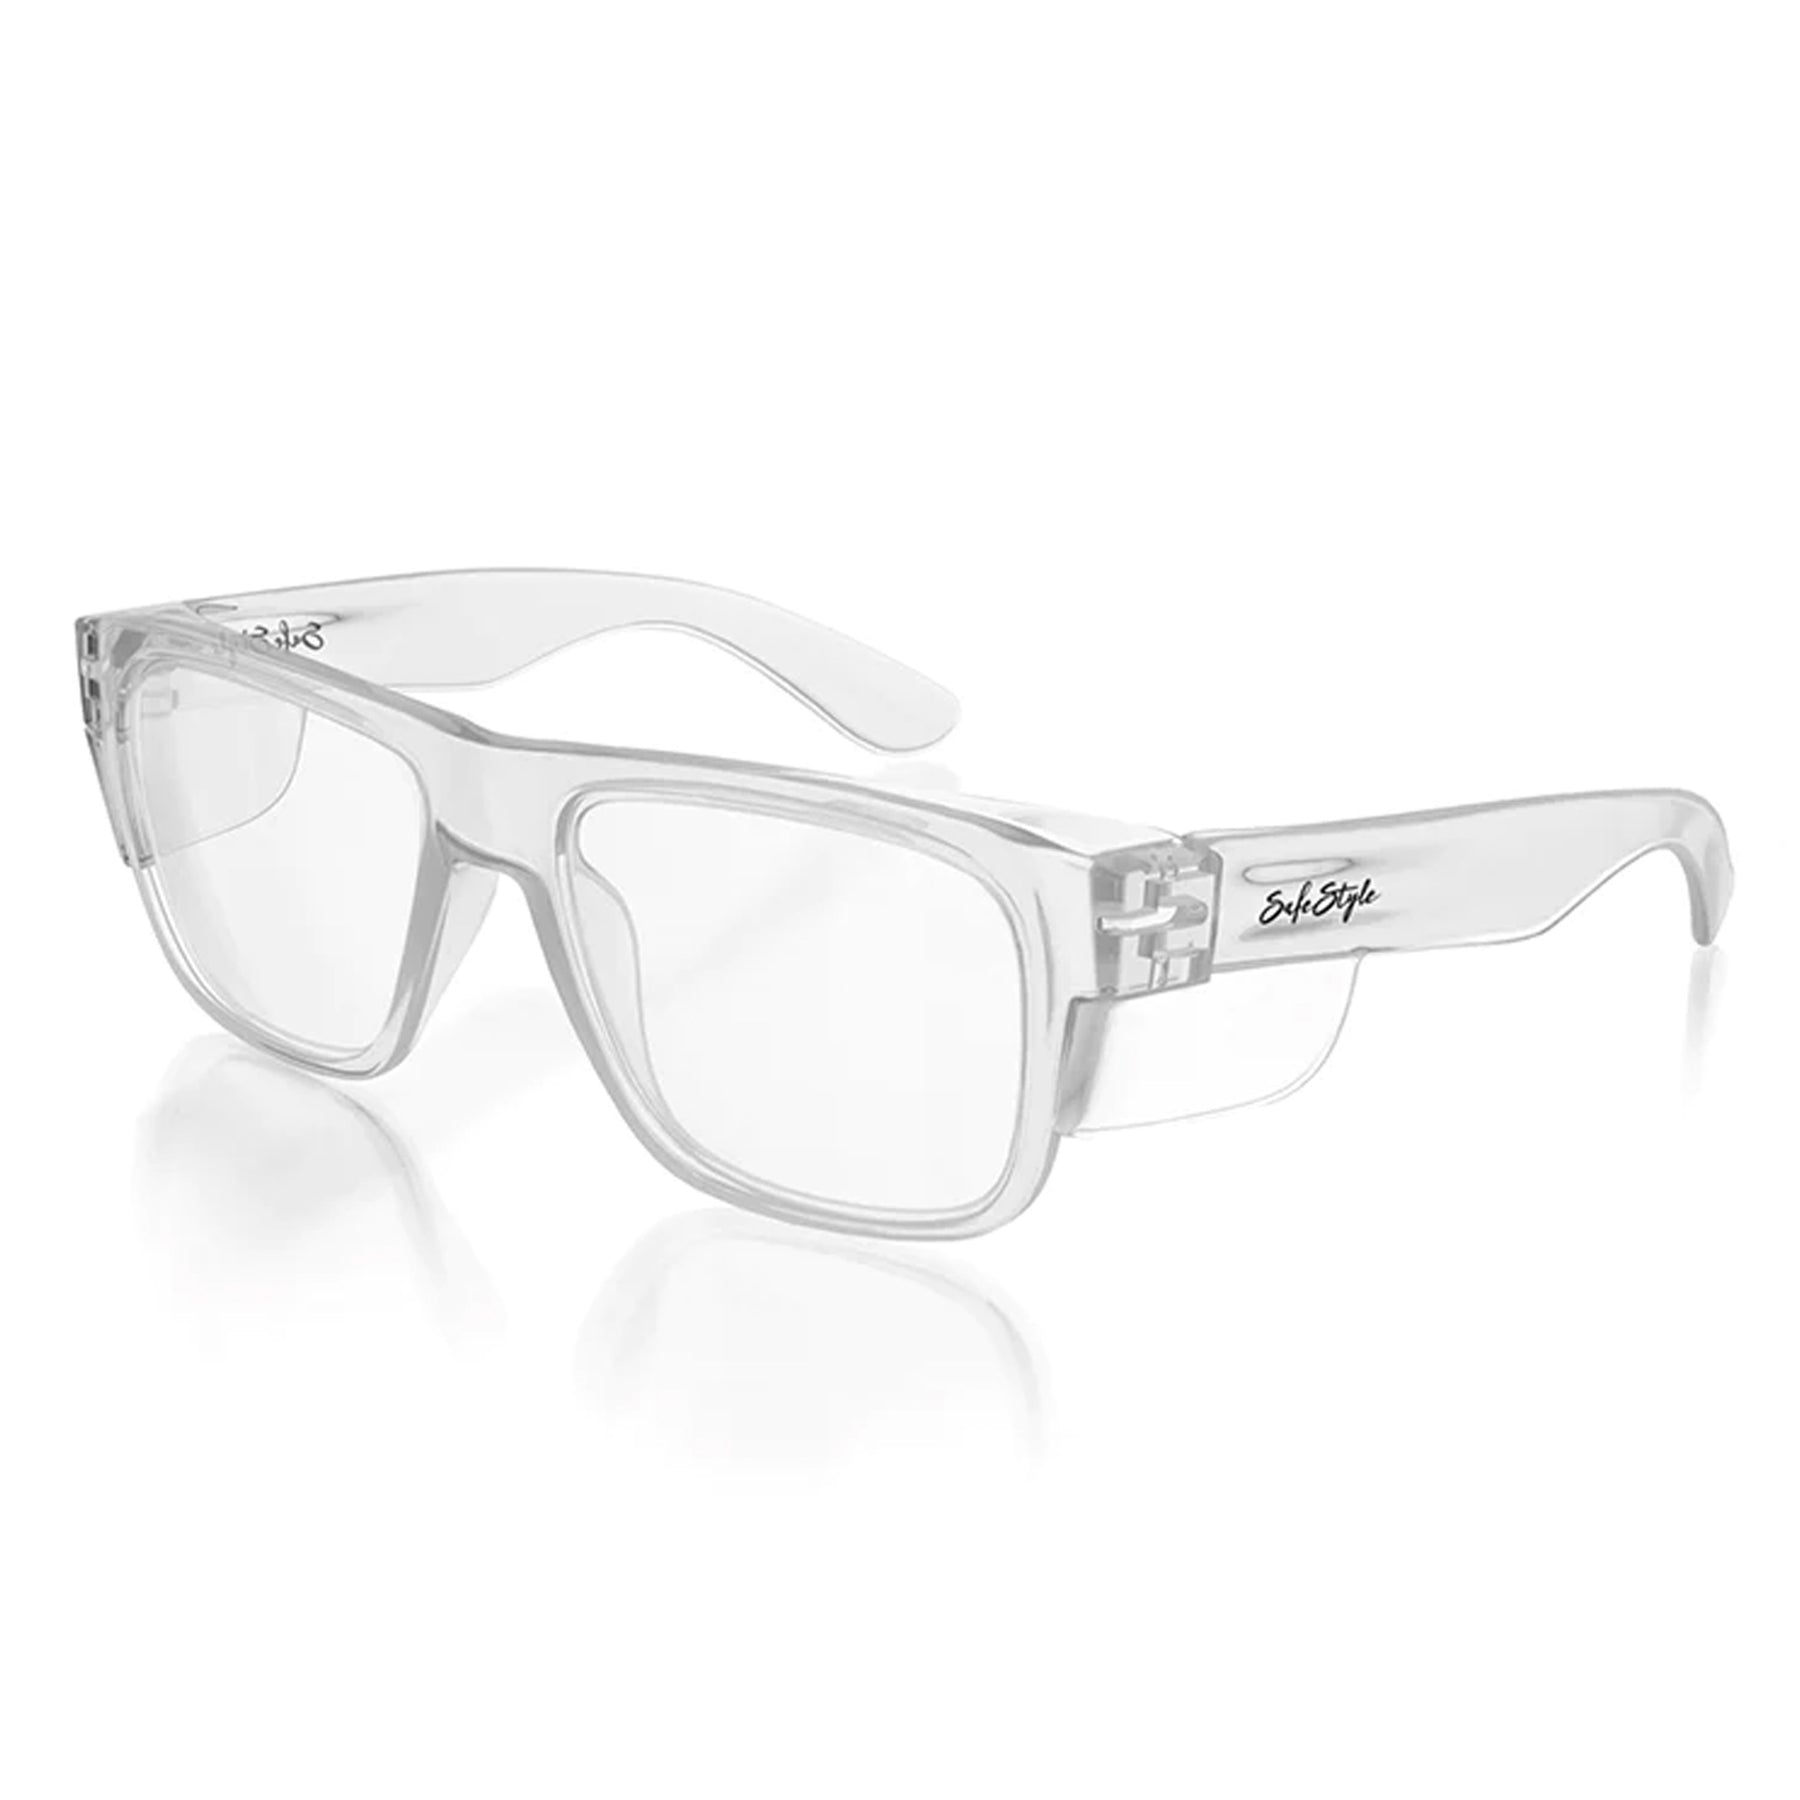 FUSIONS CLEAR FRAME - BLUE LIGHT LENS